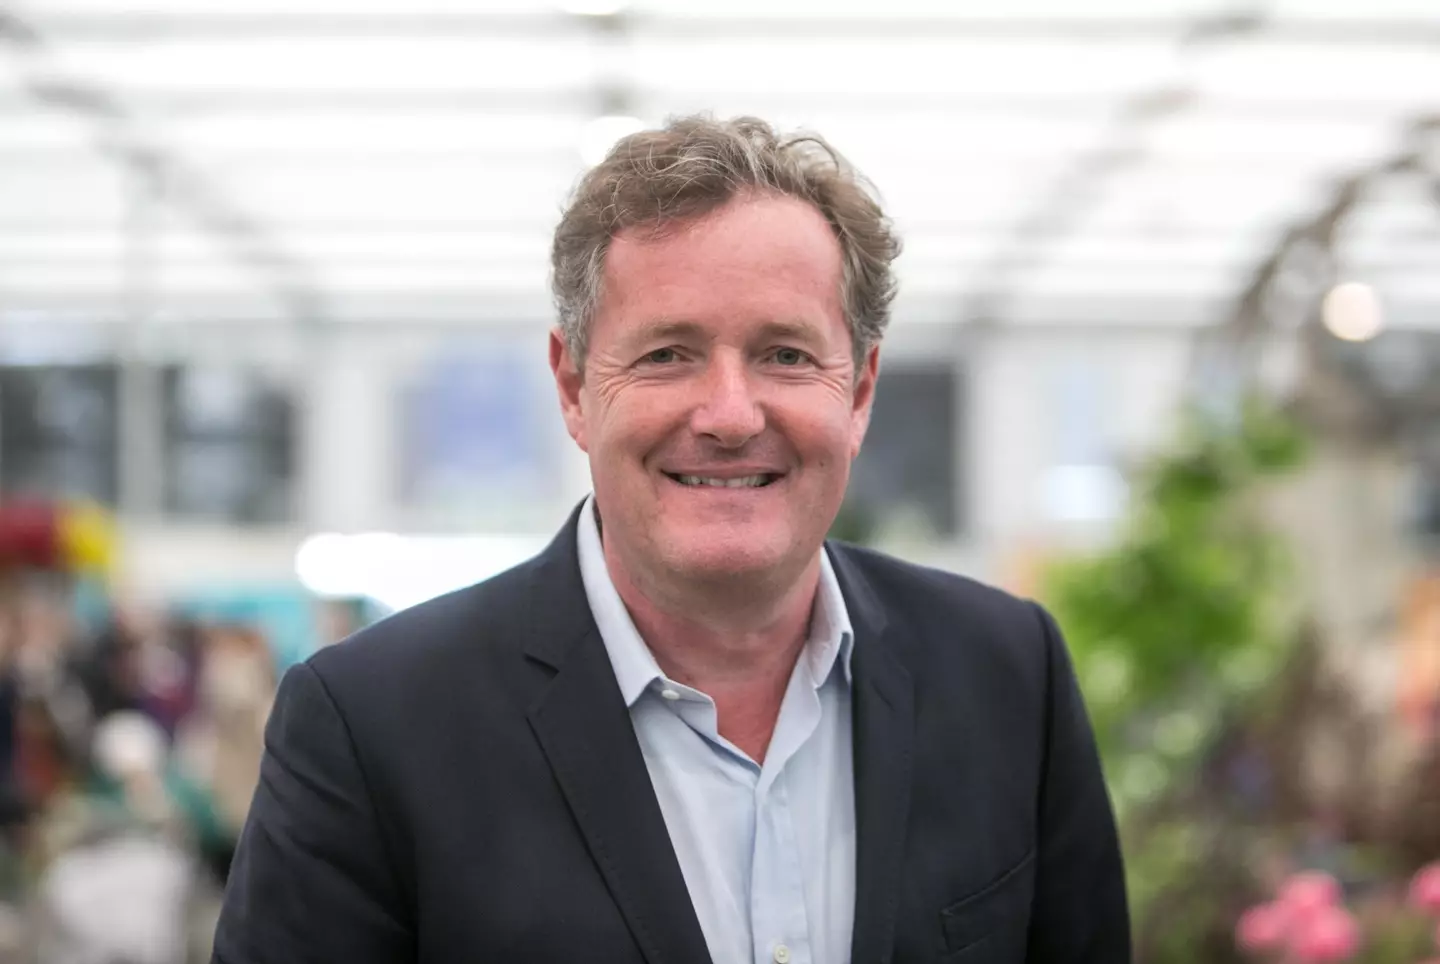 Piers Morgan would like your vote for his totally sane run for Minister for abolishing wokery.